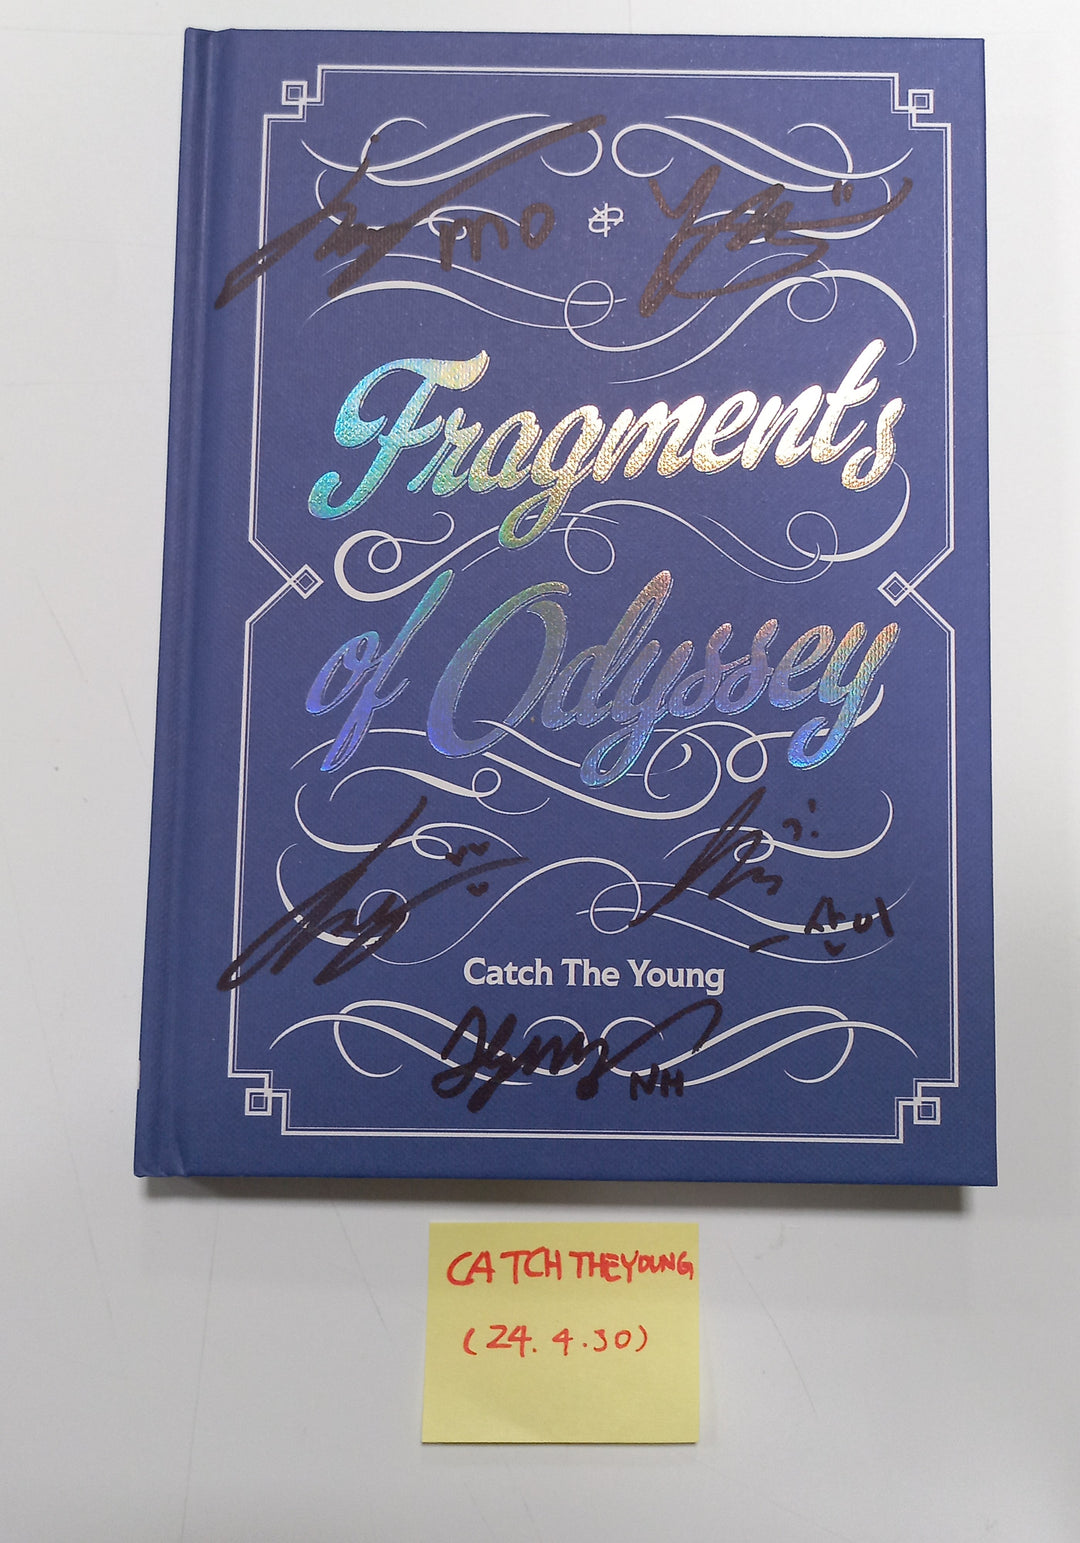 Catch The Young "Fragments of Odyssey" - Hand Autographed(Signed) Album [24.4.30]